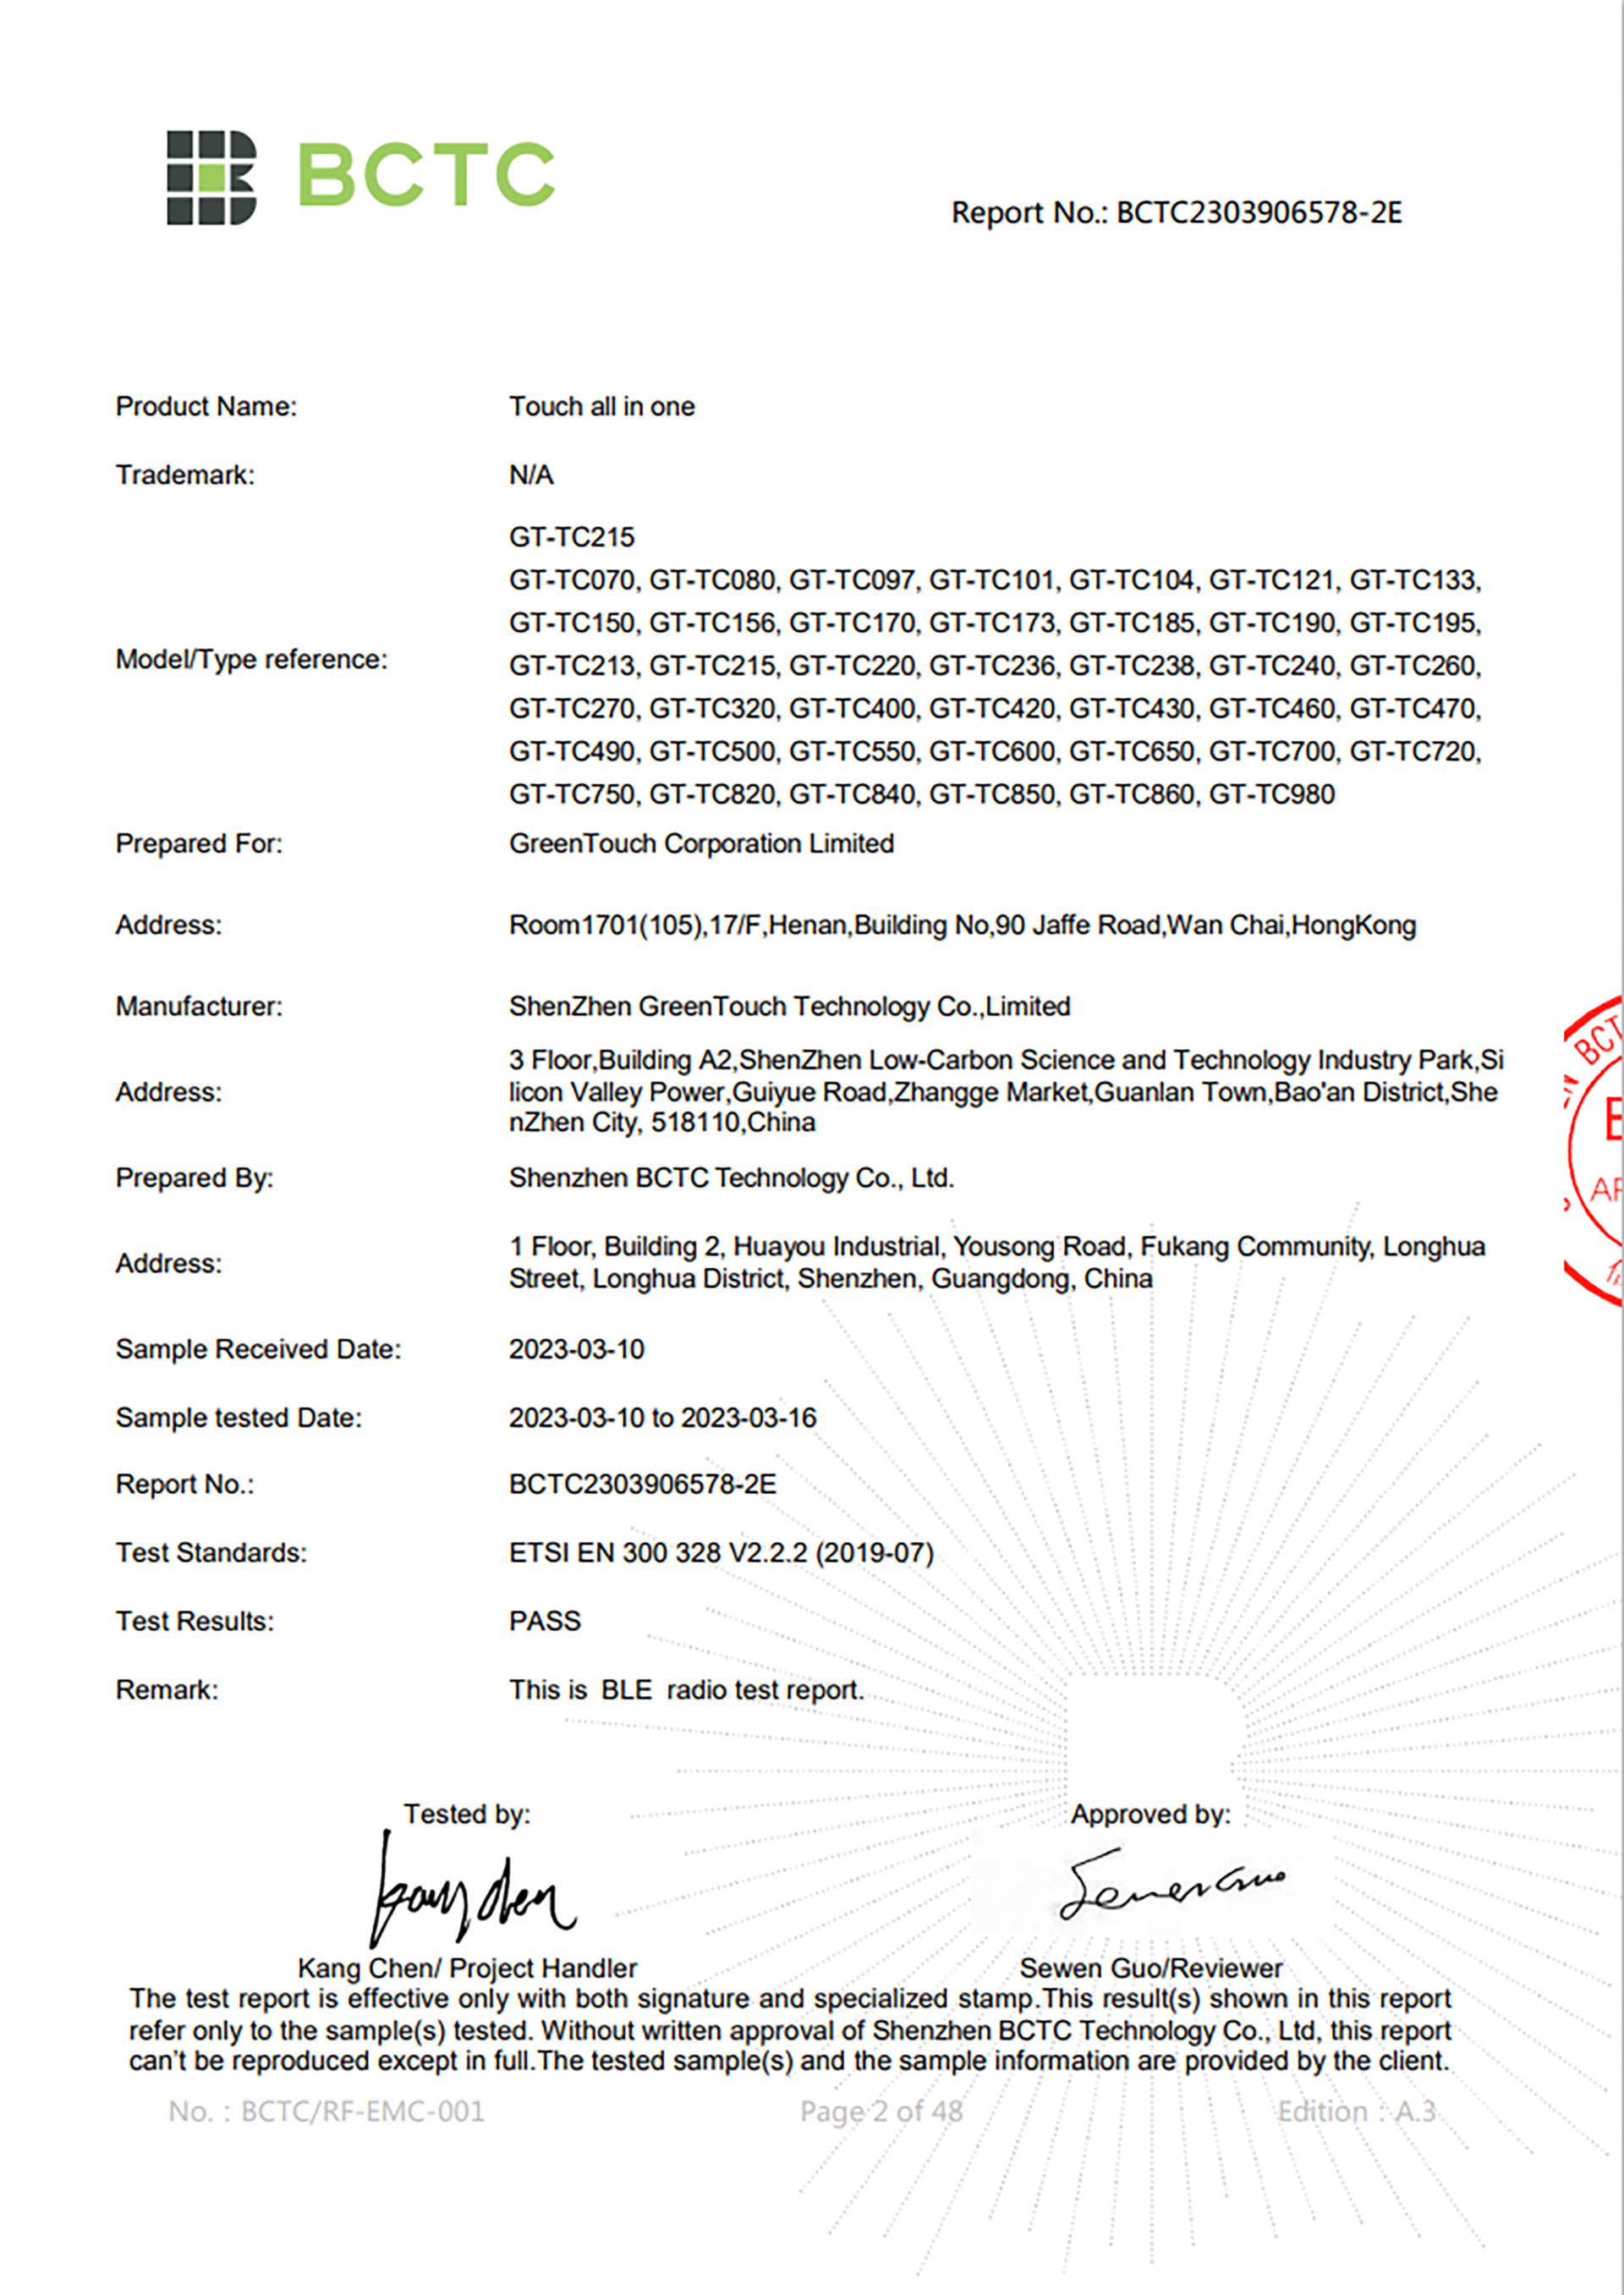 Certificate of BLE